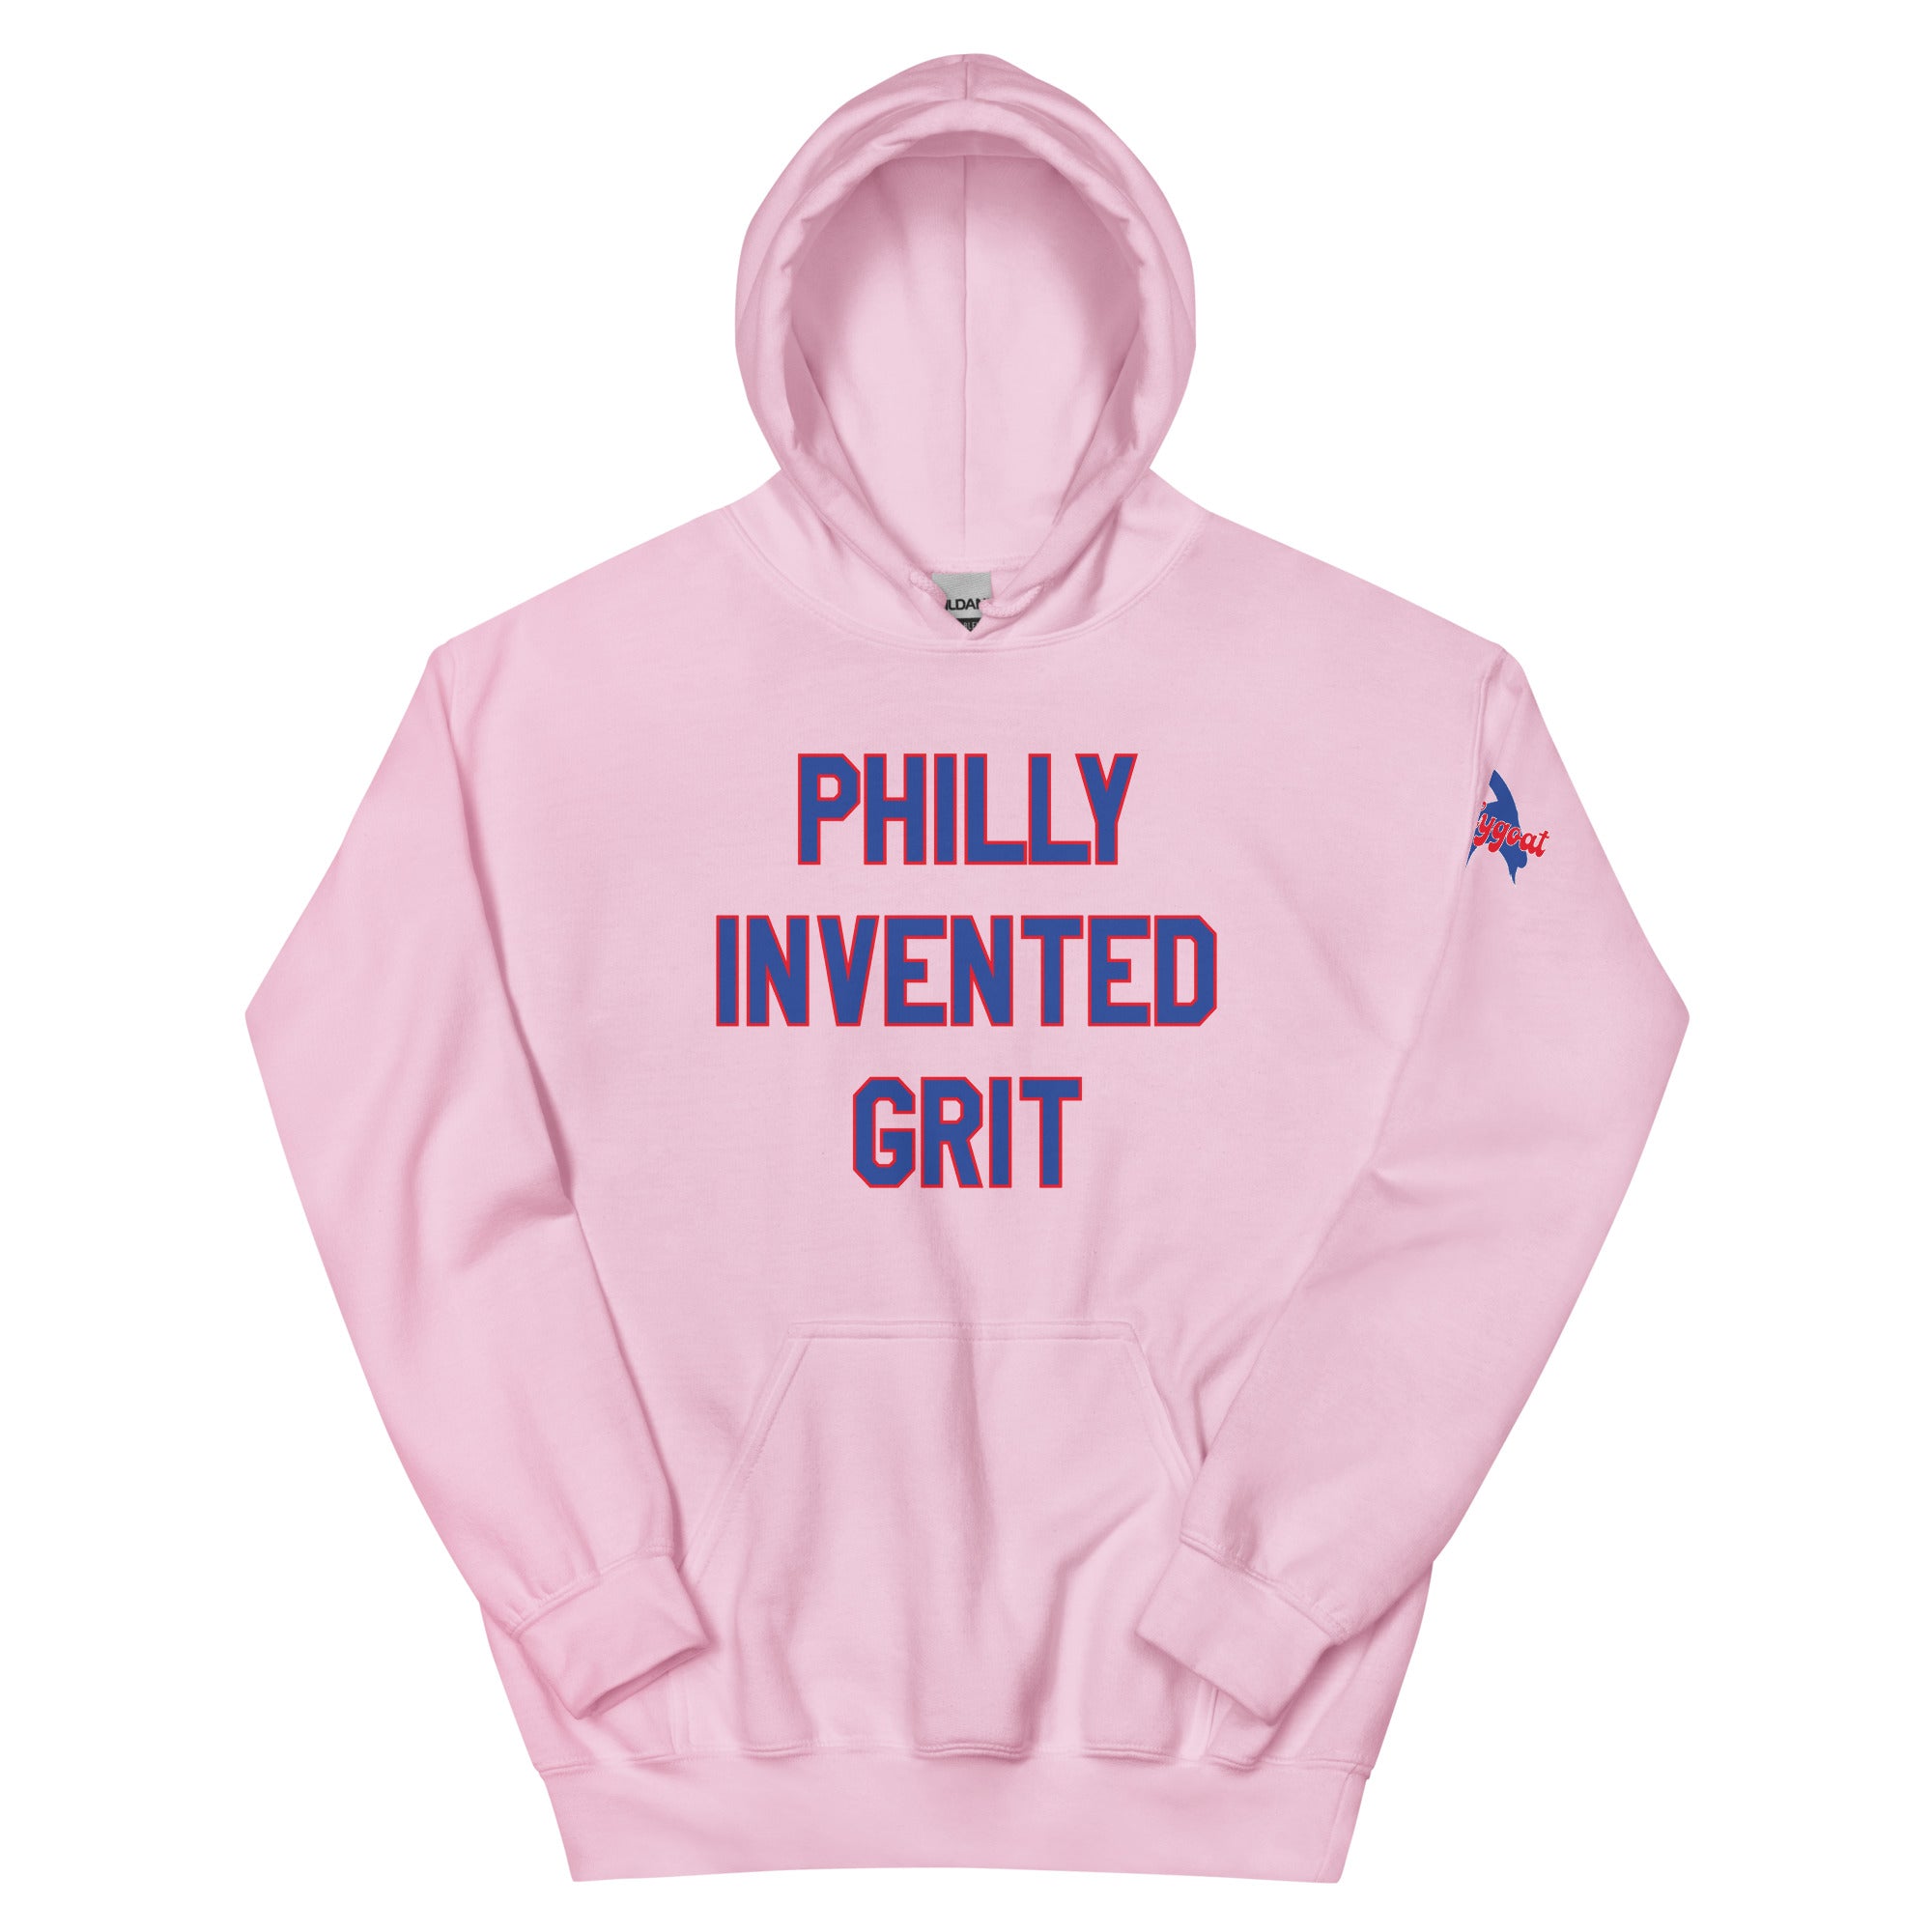 Philadelphia 76ers Phillies philly invented grit pink hoodie Phillygoat